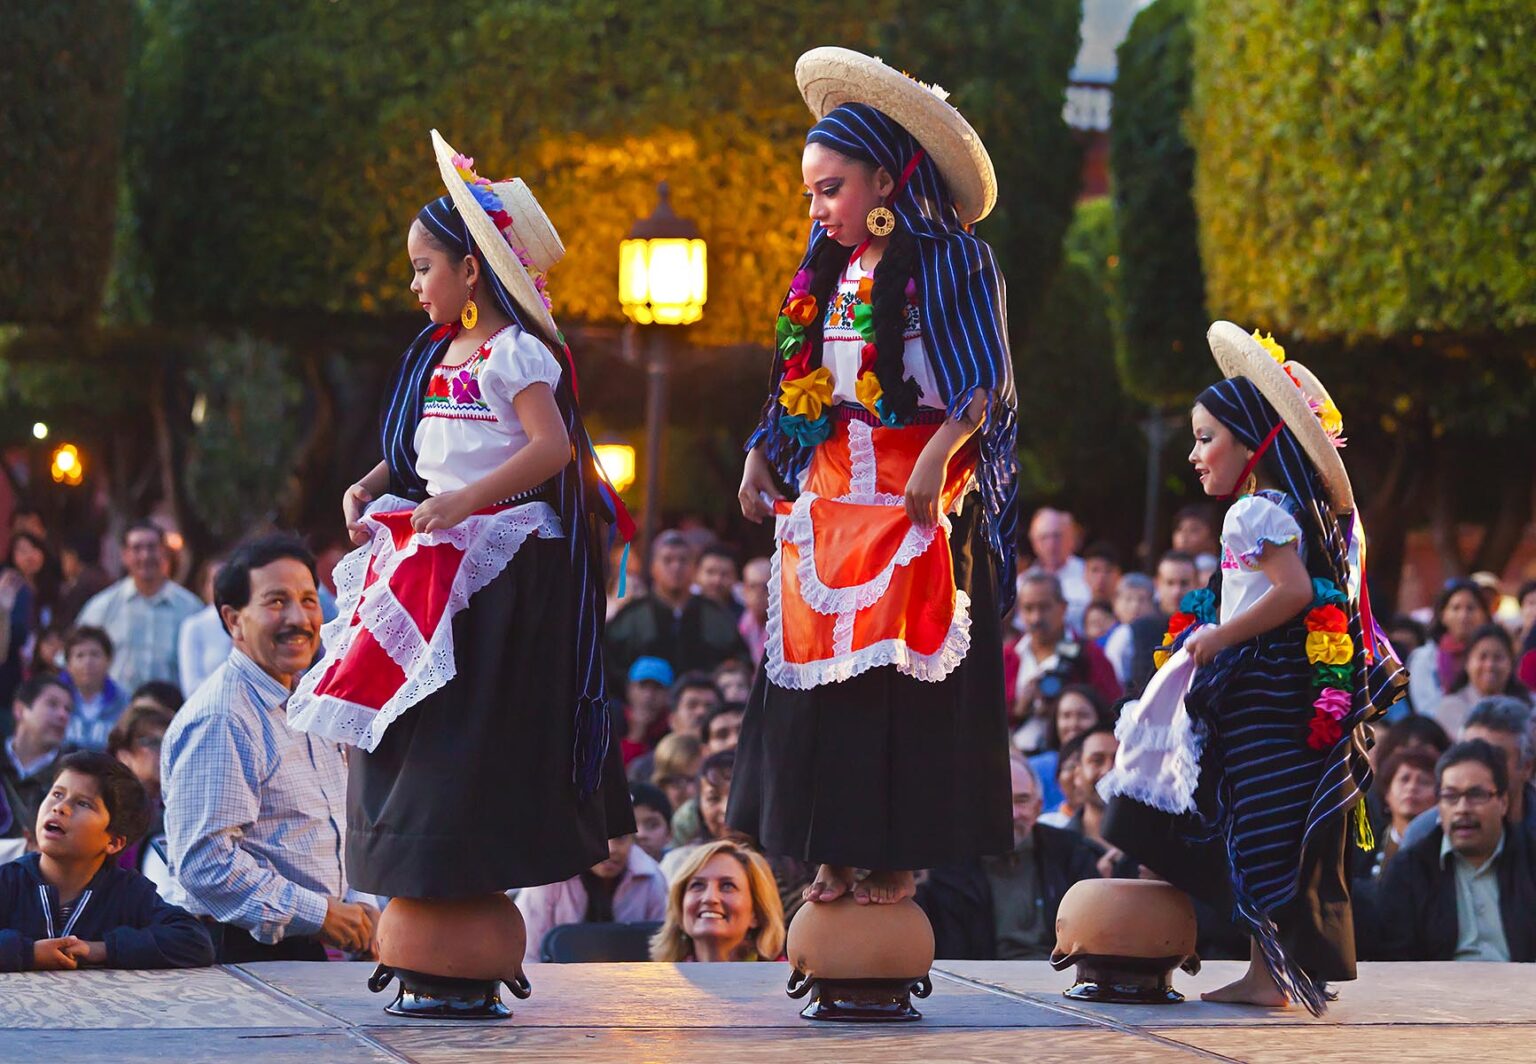 DANCERS perform in the Jardin or Central Square during the annual FOLK DANCE FESTIVAL - SAN MIGUEL DE ALLENDE, MEXICO